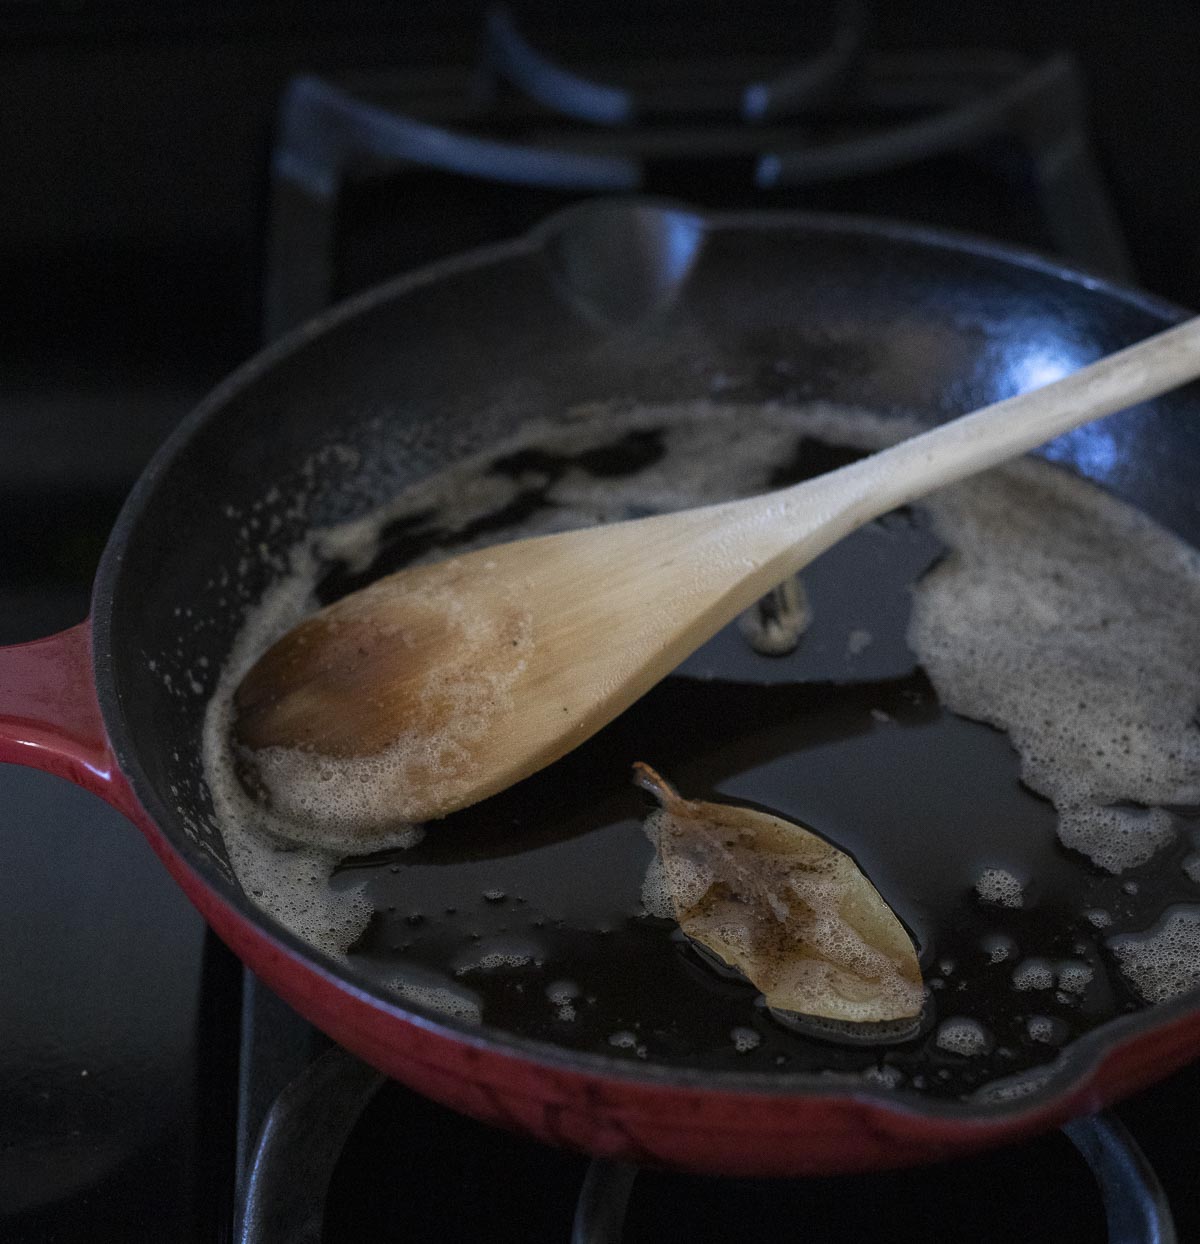 Browned butter mixture being stirred with a wooden spoon in a skillet.